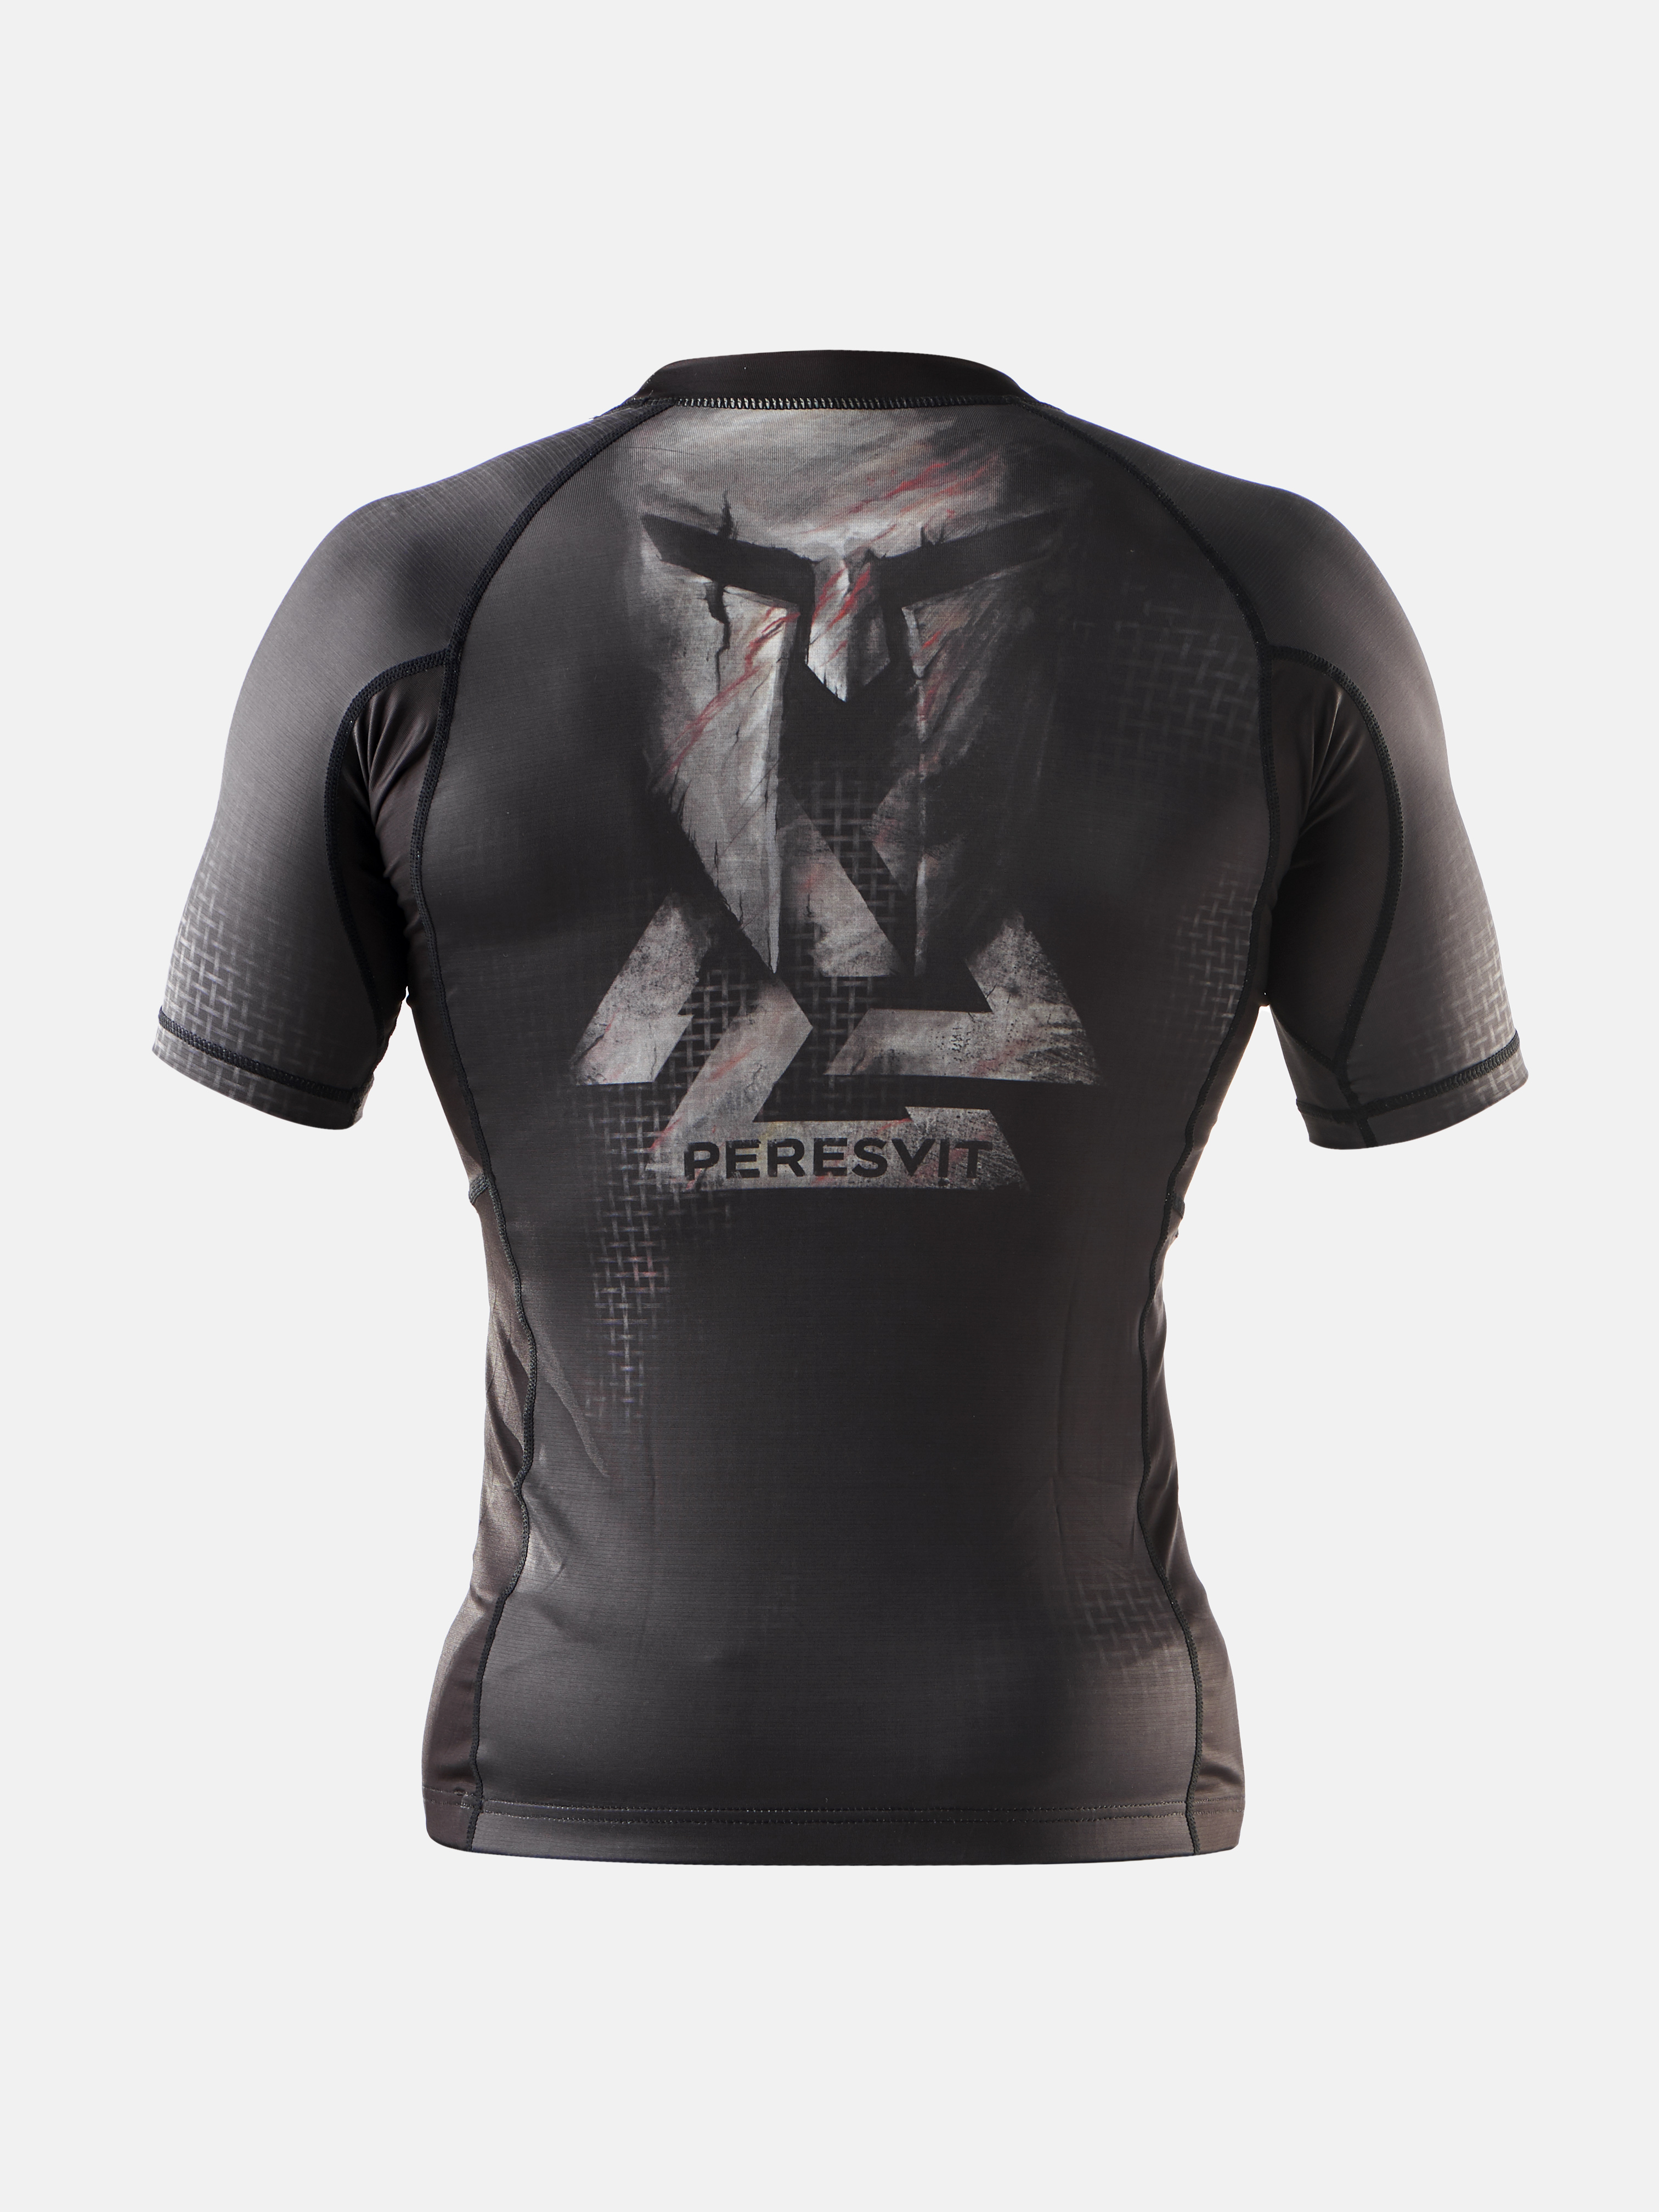 Peresvit Immortal Silver Force Short Sleeve Last Stand, Photo No. 2